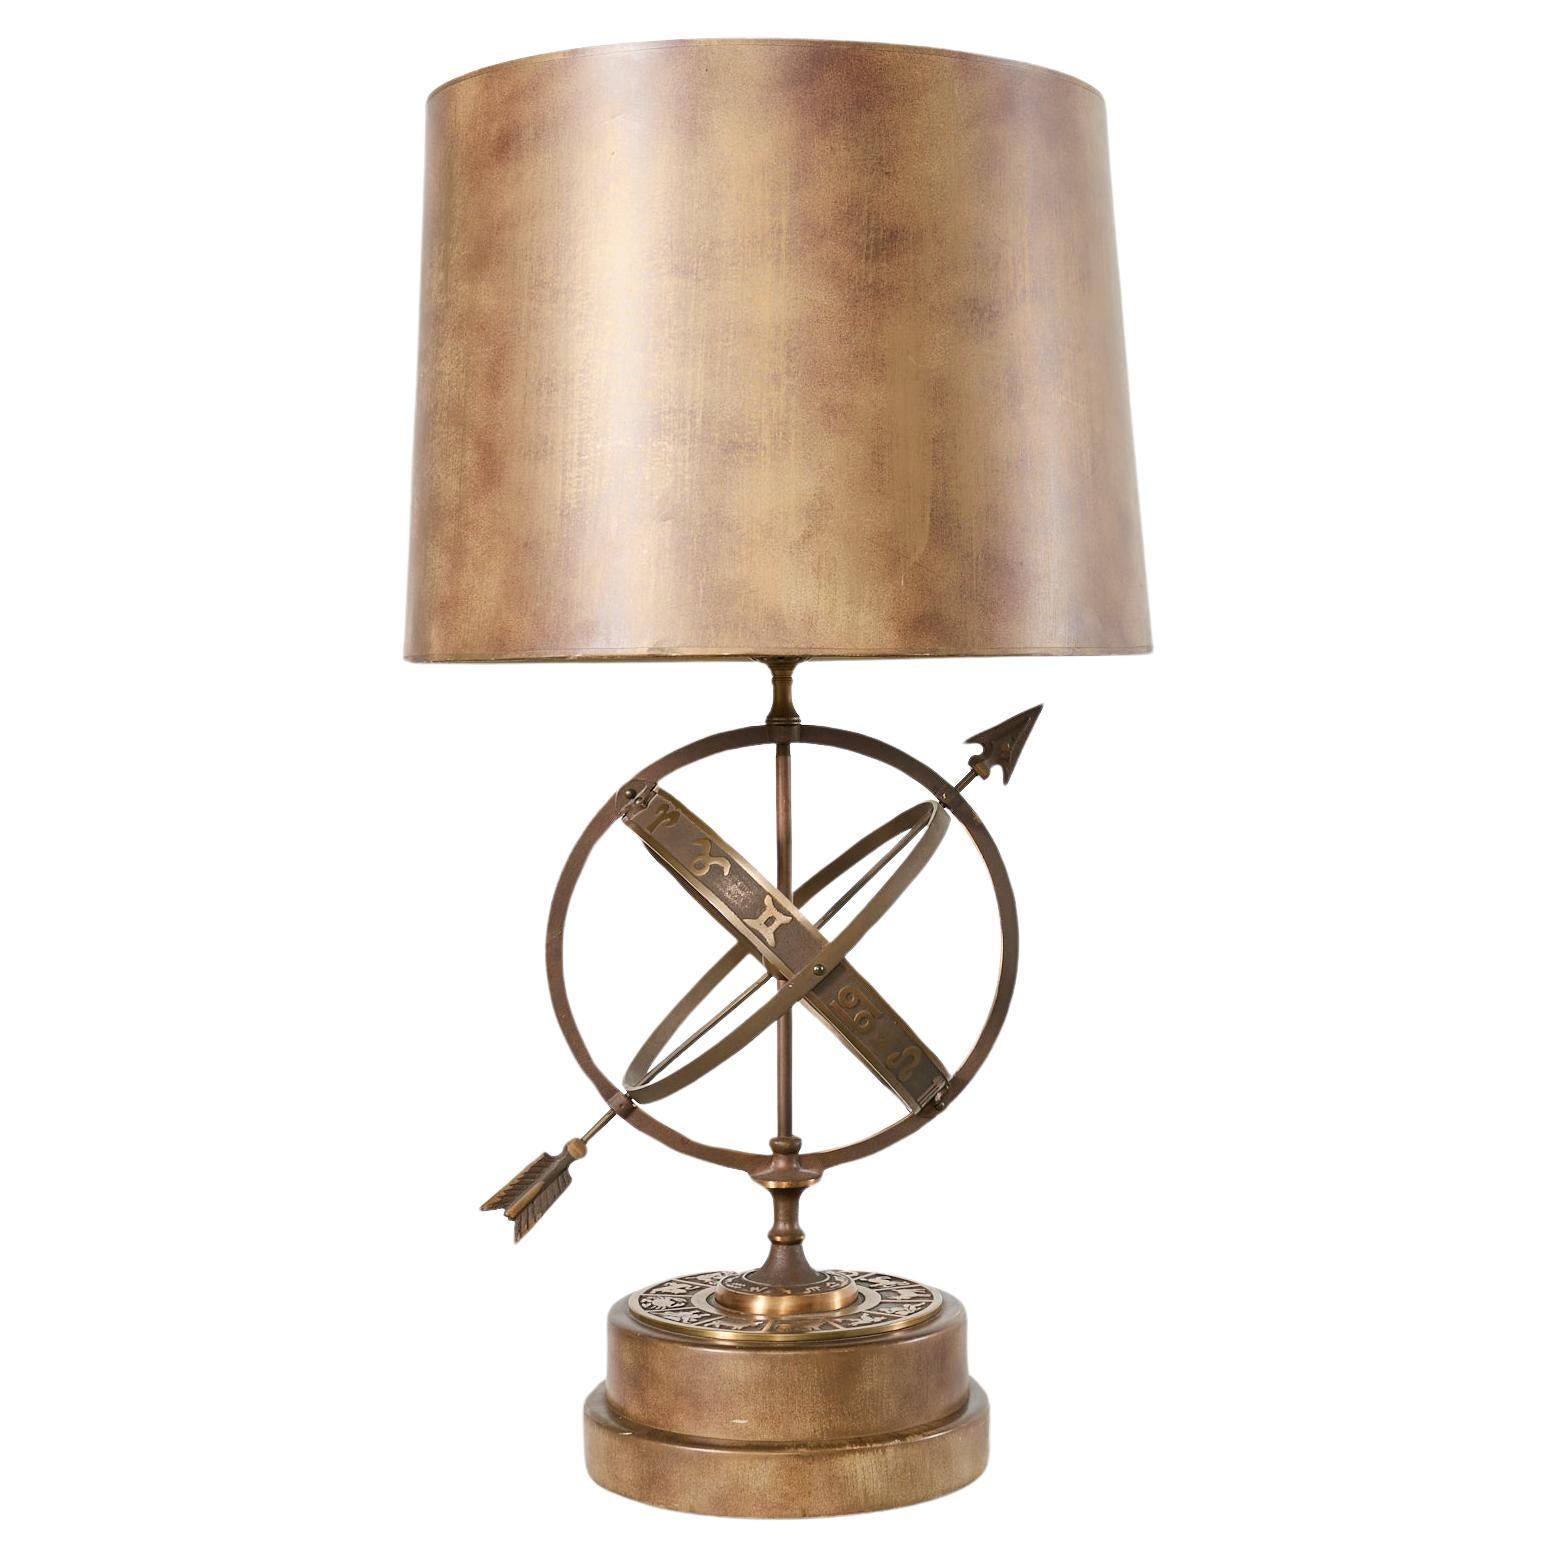 What are Frederick Cooper lamps?